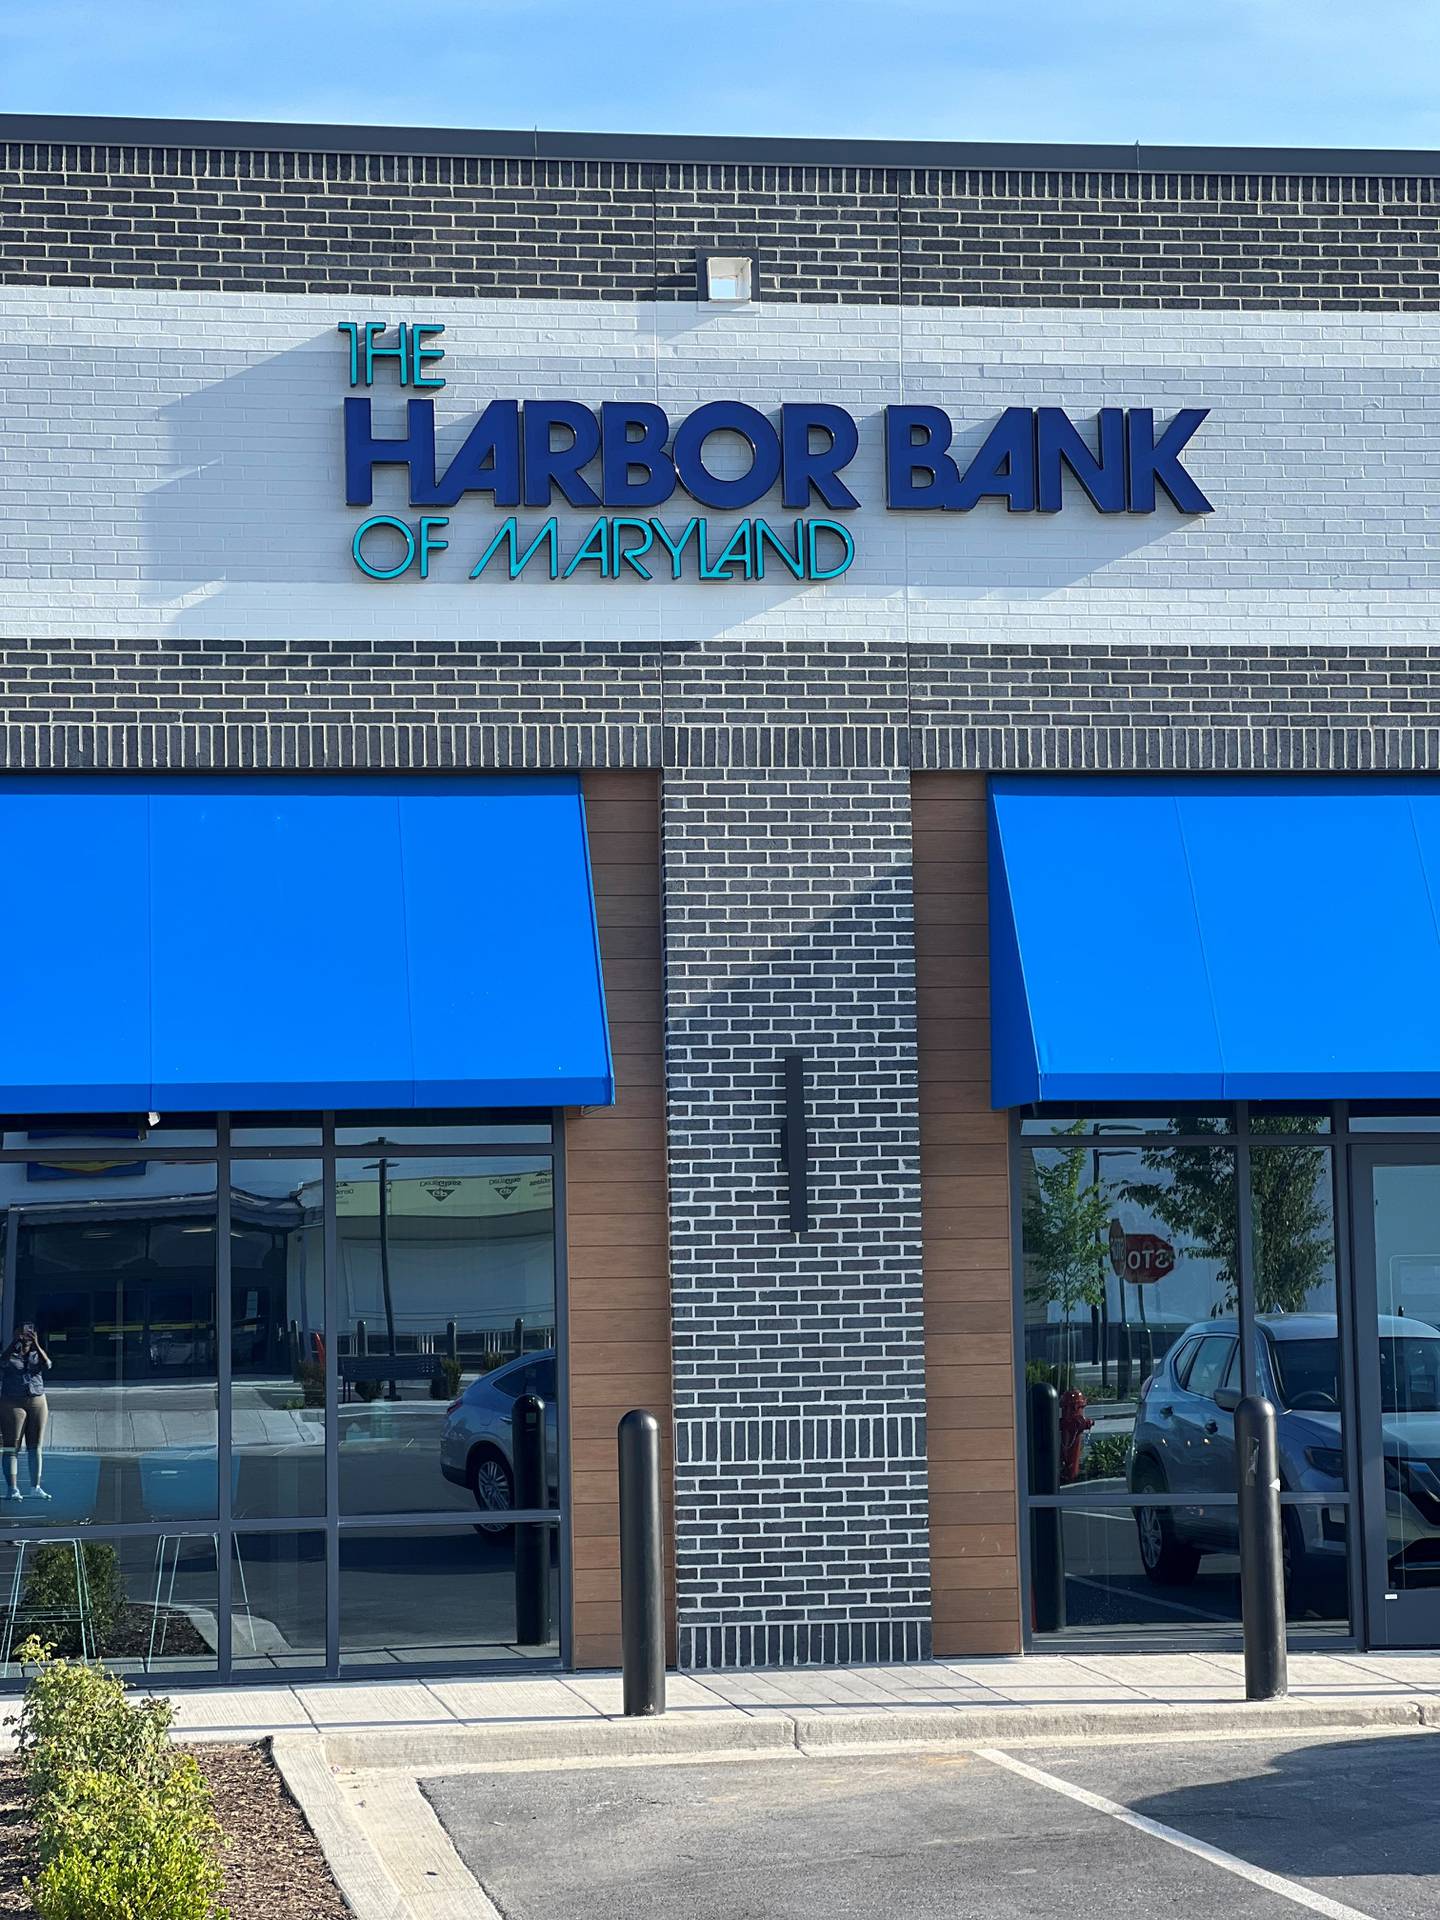 The Harbor Bank of Maryland opened a new branch in the Northwood Commons on June 19, 2022.